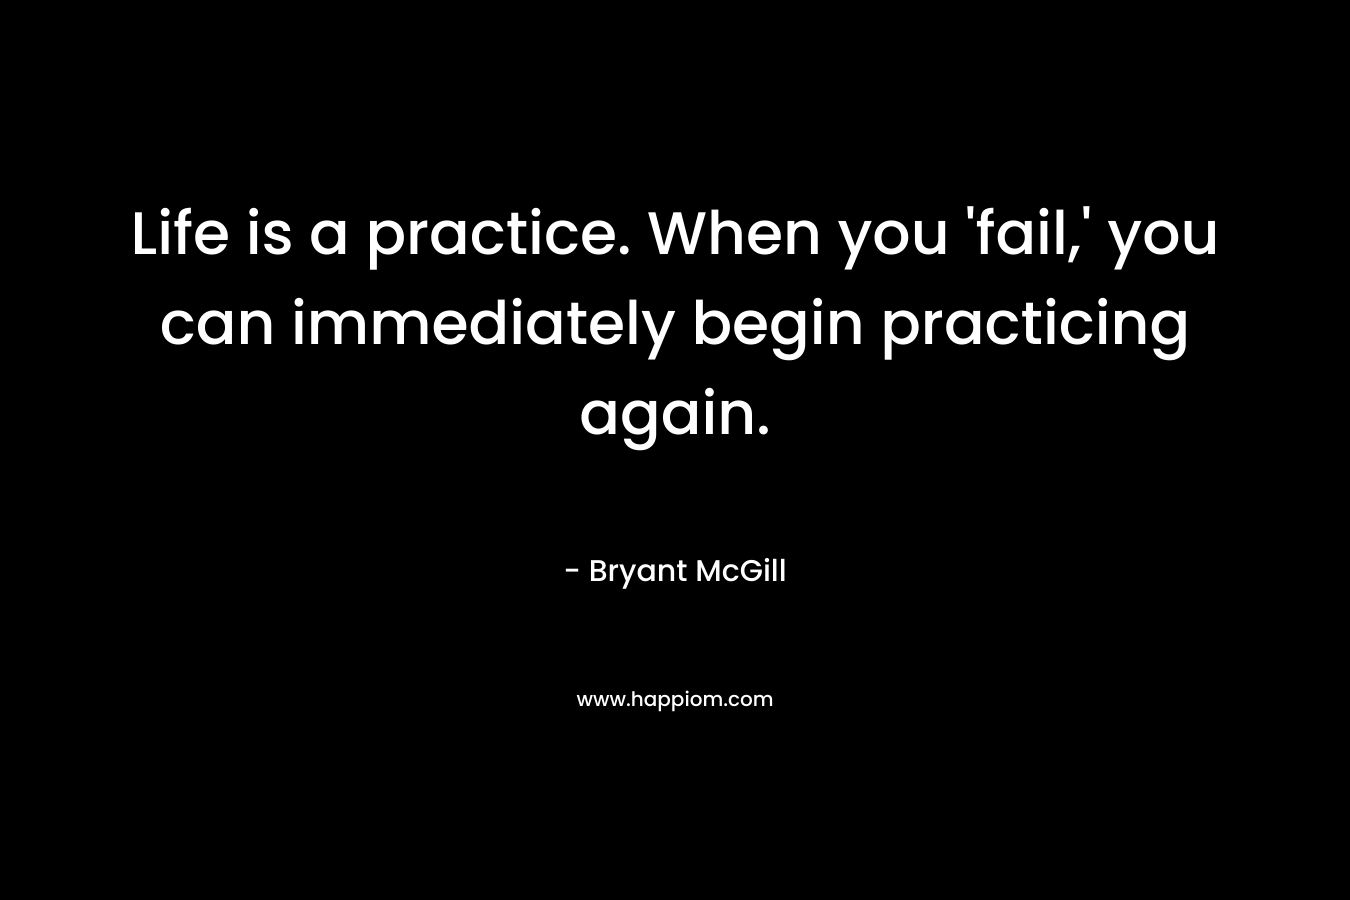 Life is a practice. When you 'fail,' you can immediately begin practicing again.